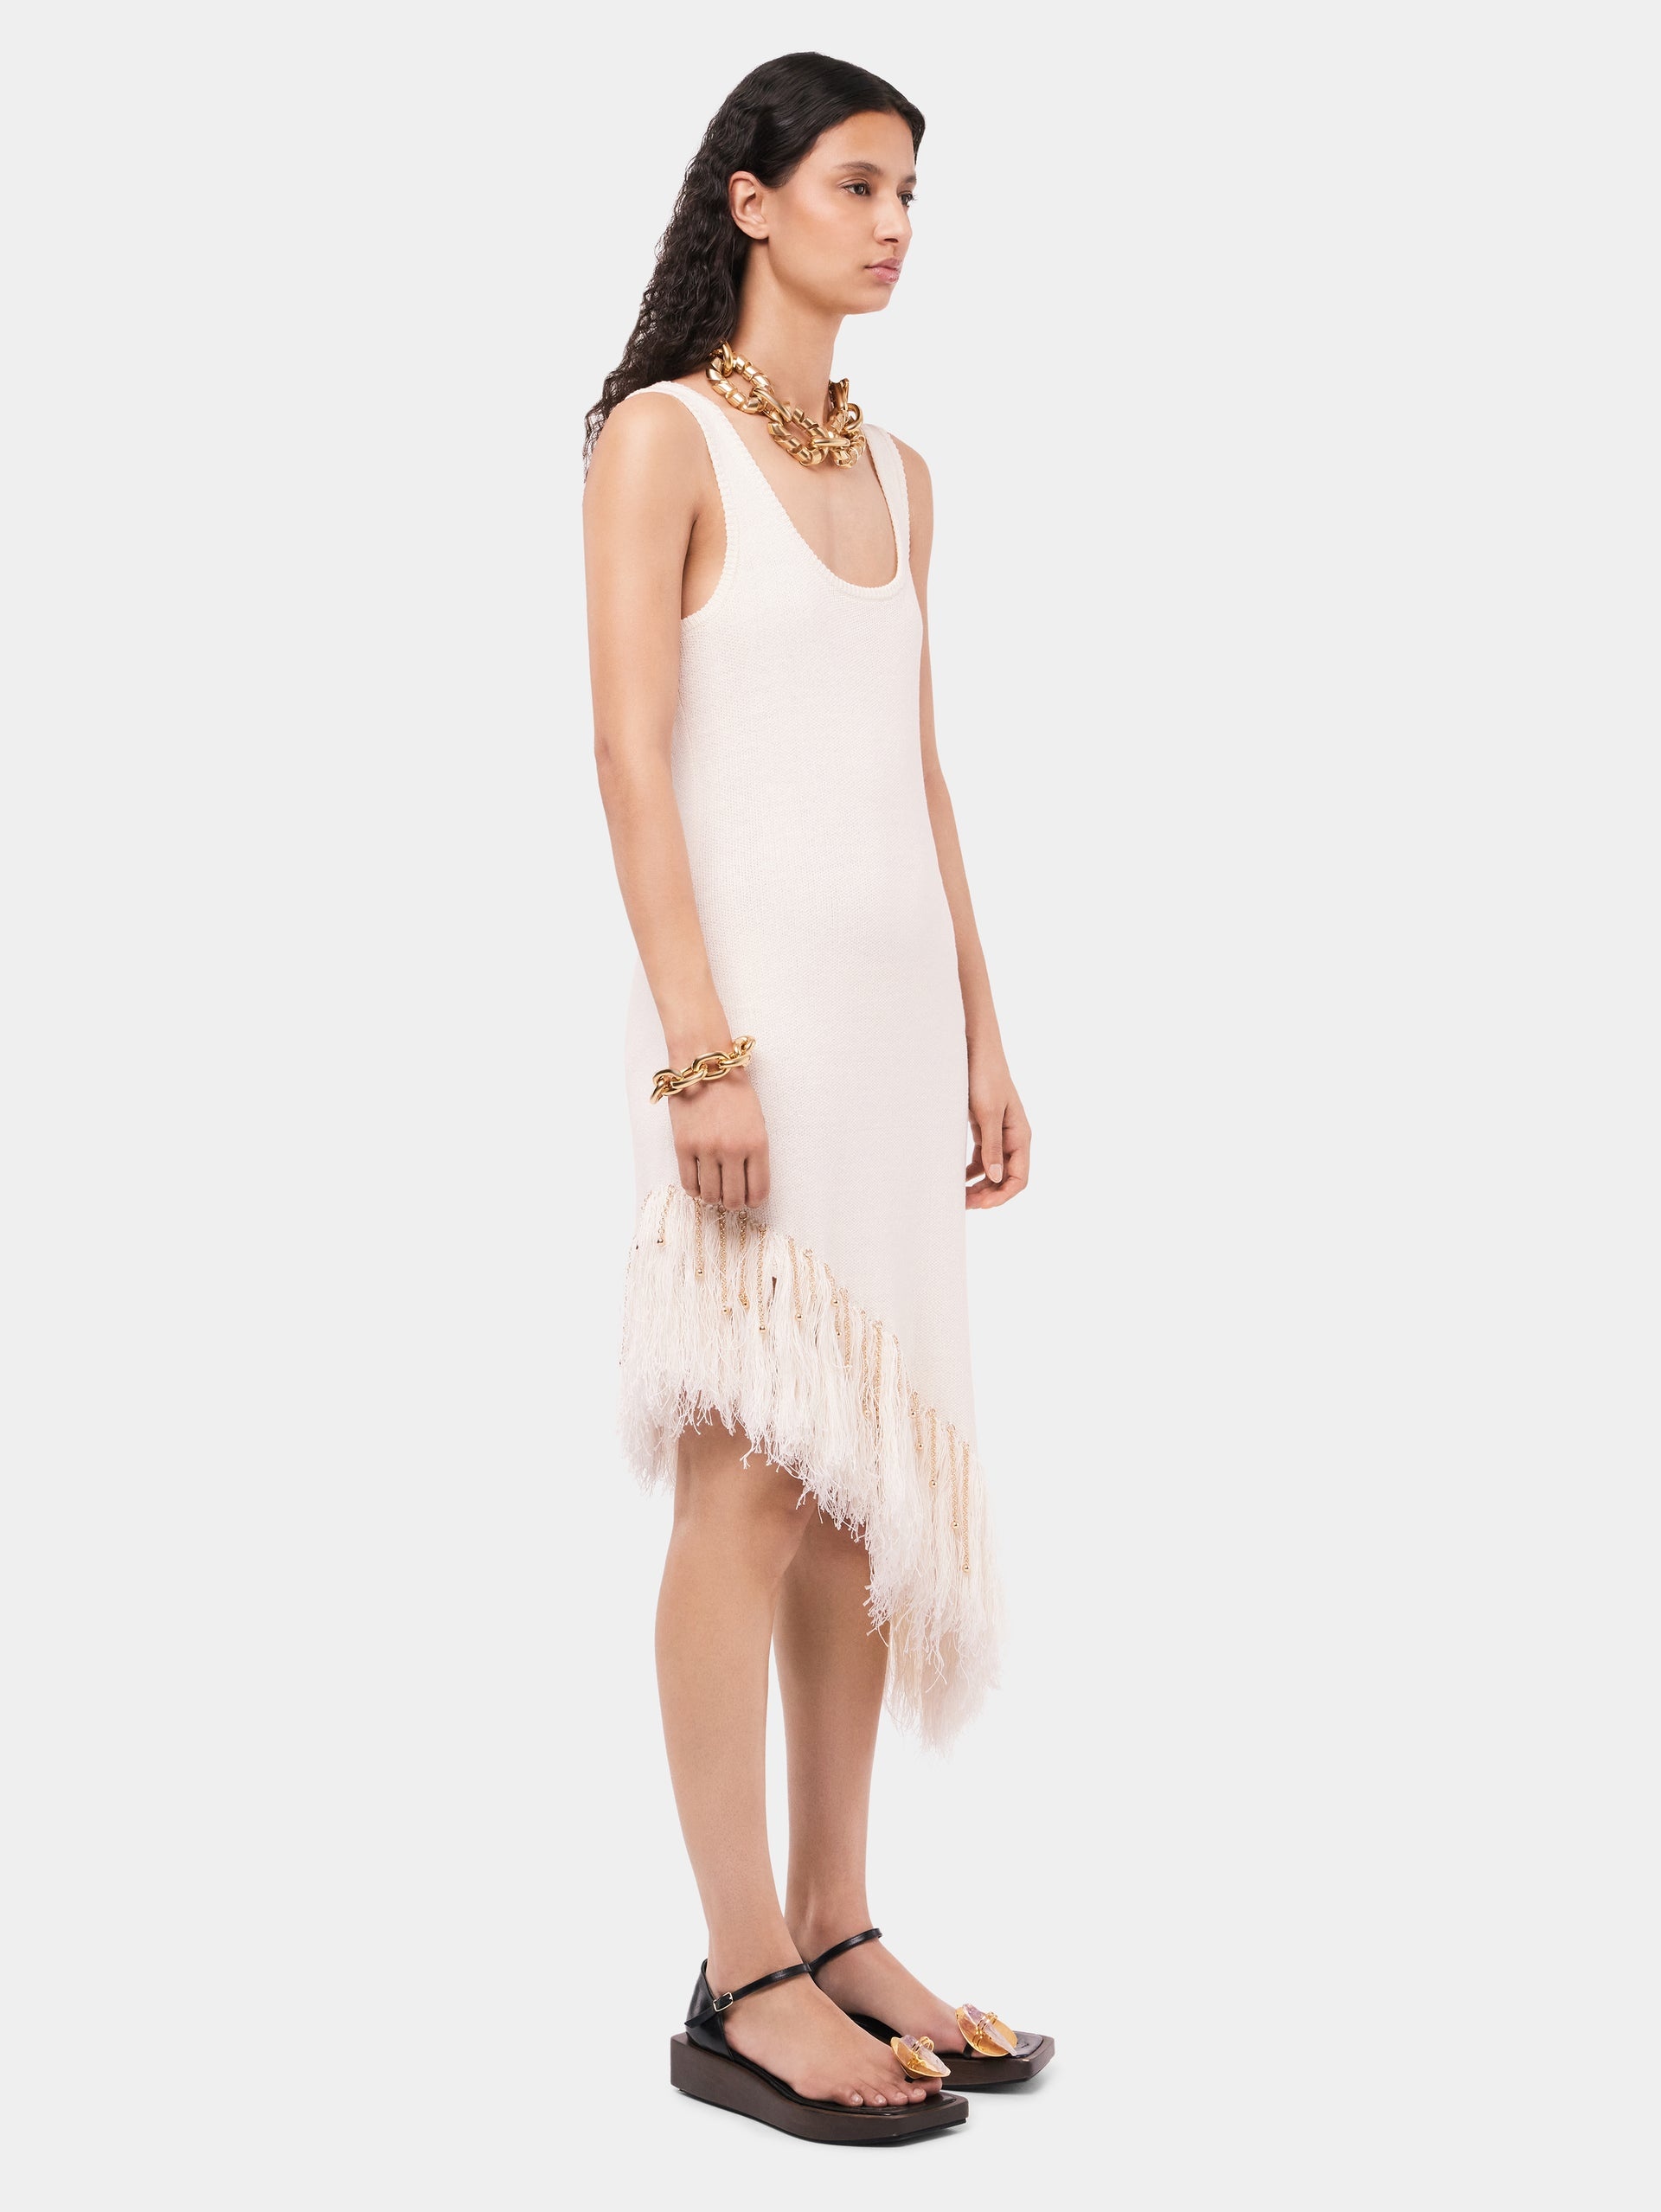 ASYMMETRICAL OFF WHITE WOVEN DRESS WITH KNITTED BEADS AND FEATHERS - 3